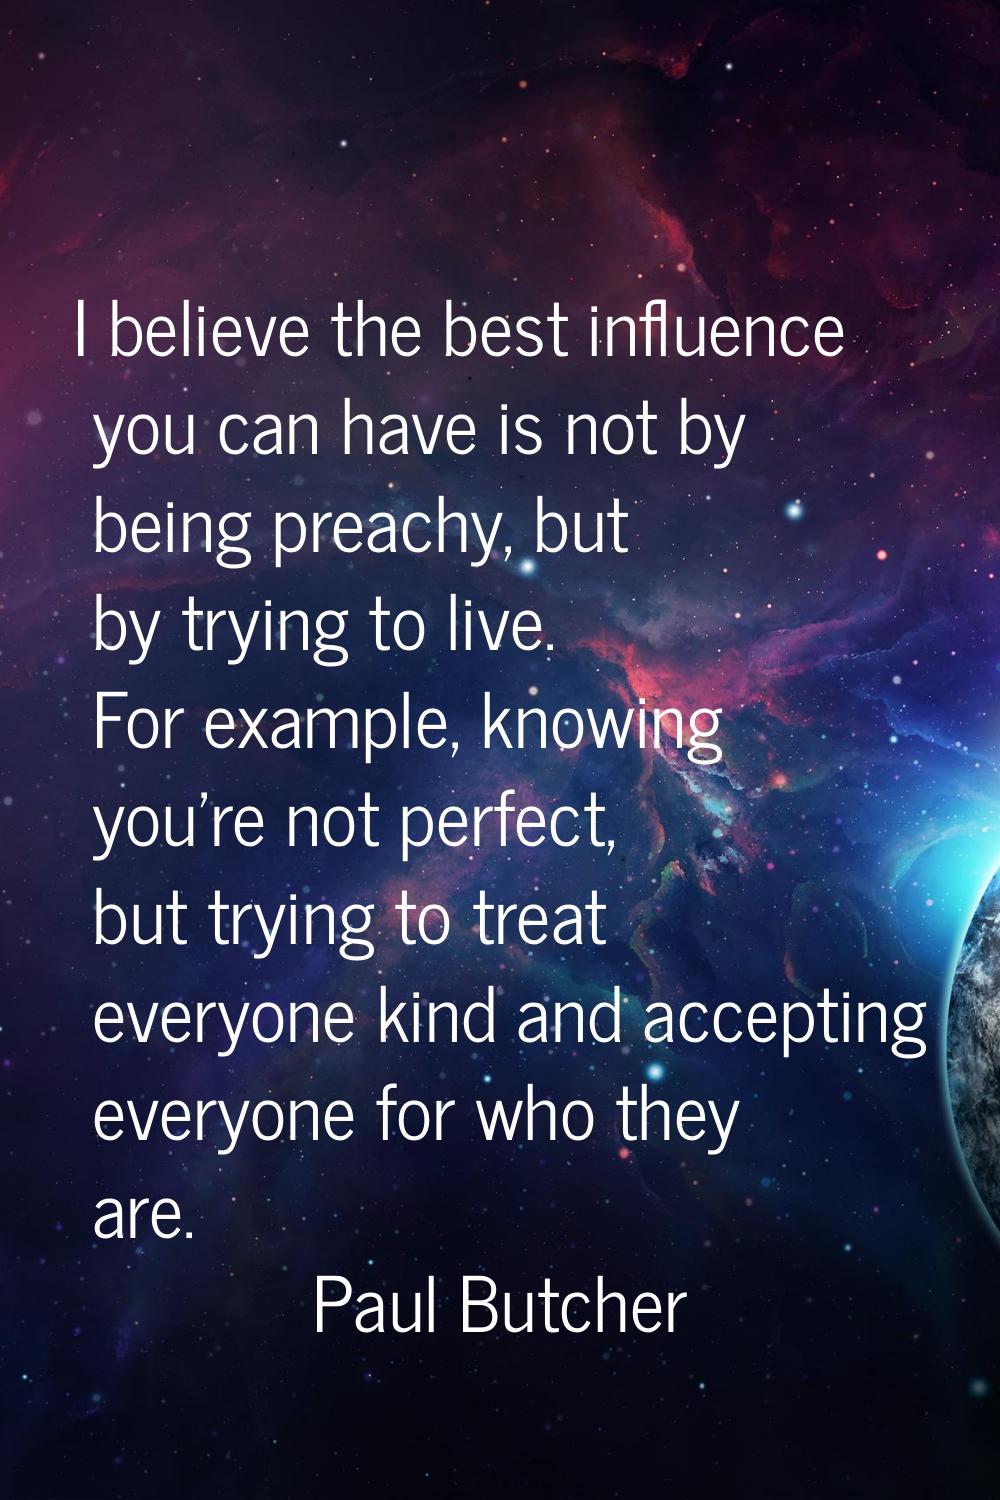 I believe the best influence you can have is not by being preachy, but by trying to live. For examp